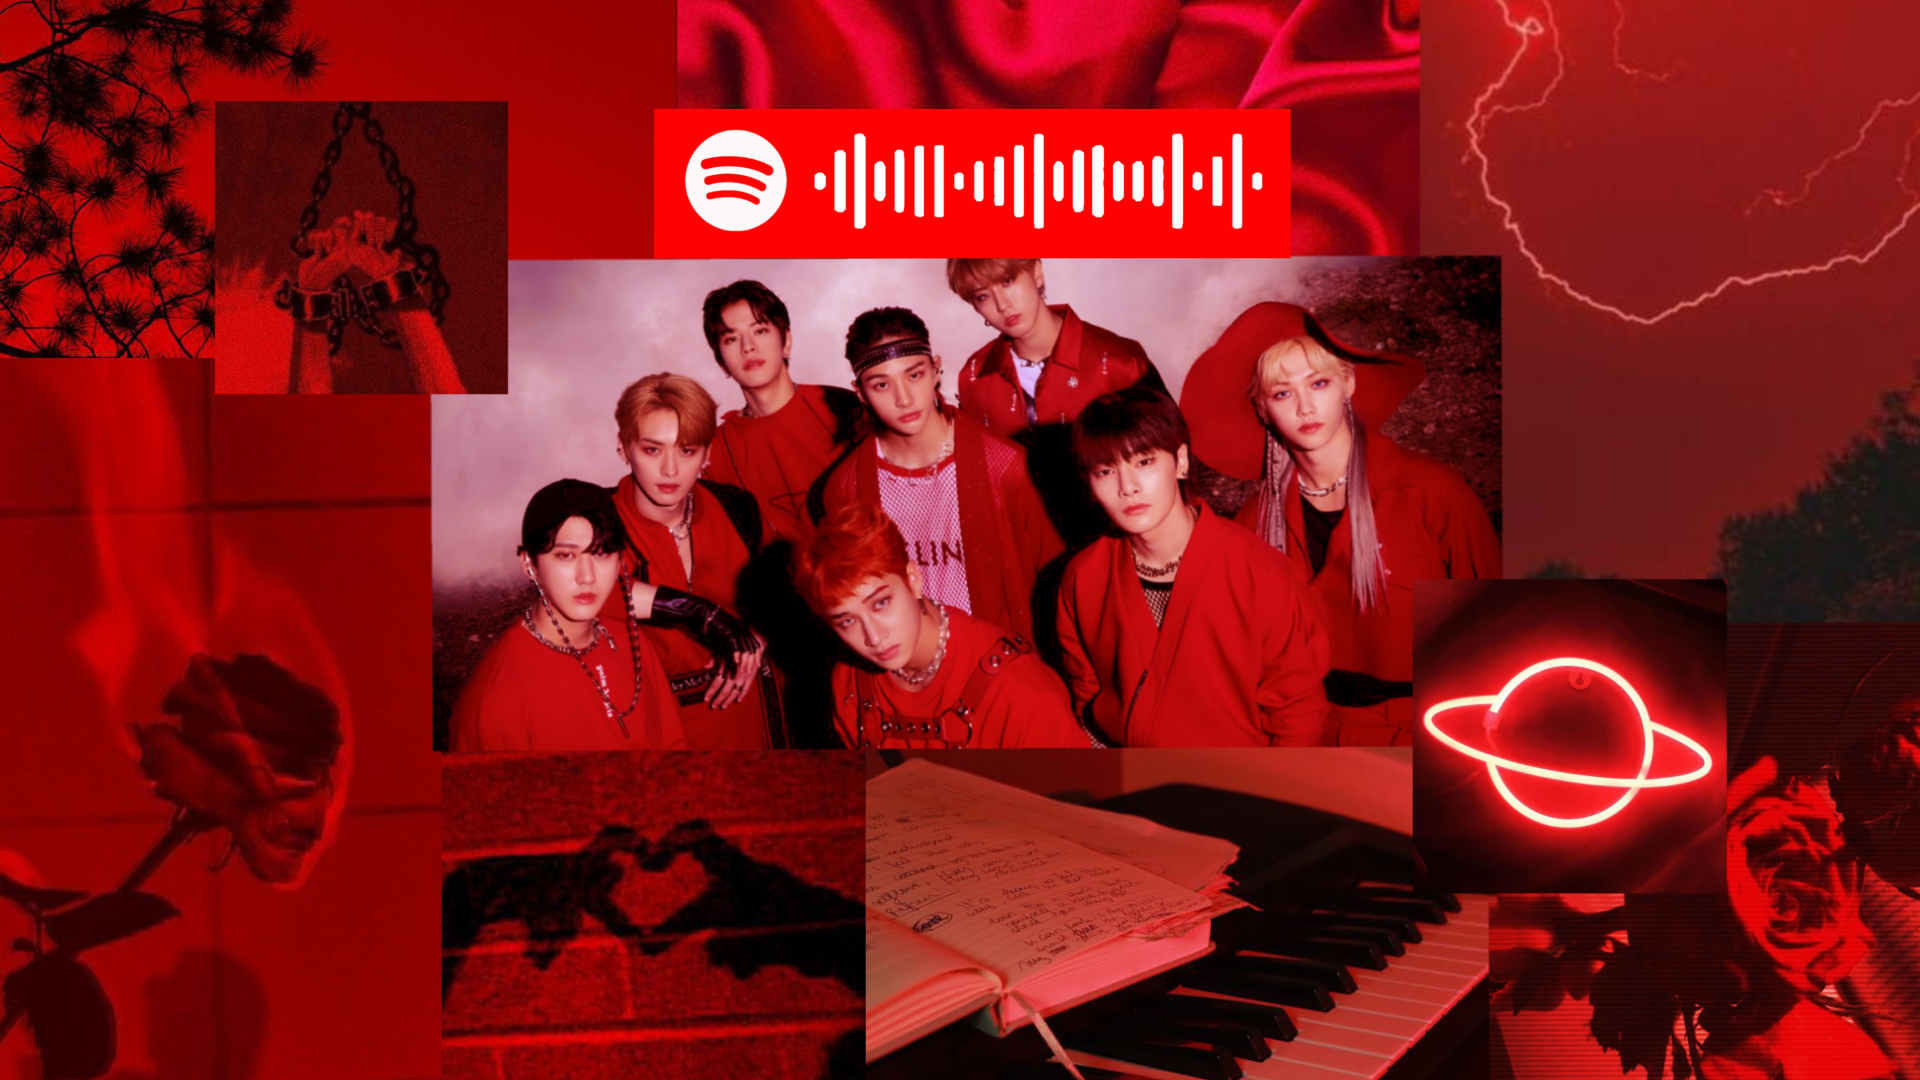 Red aesthetic wallpaper with various images of plants, shadows, and instruments layered around each other, surrounding an image of the members of Stray Kids.